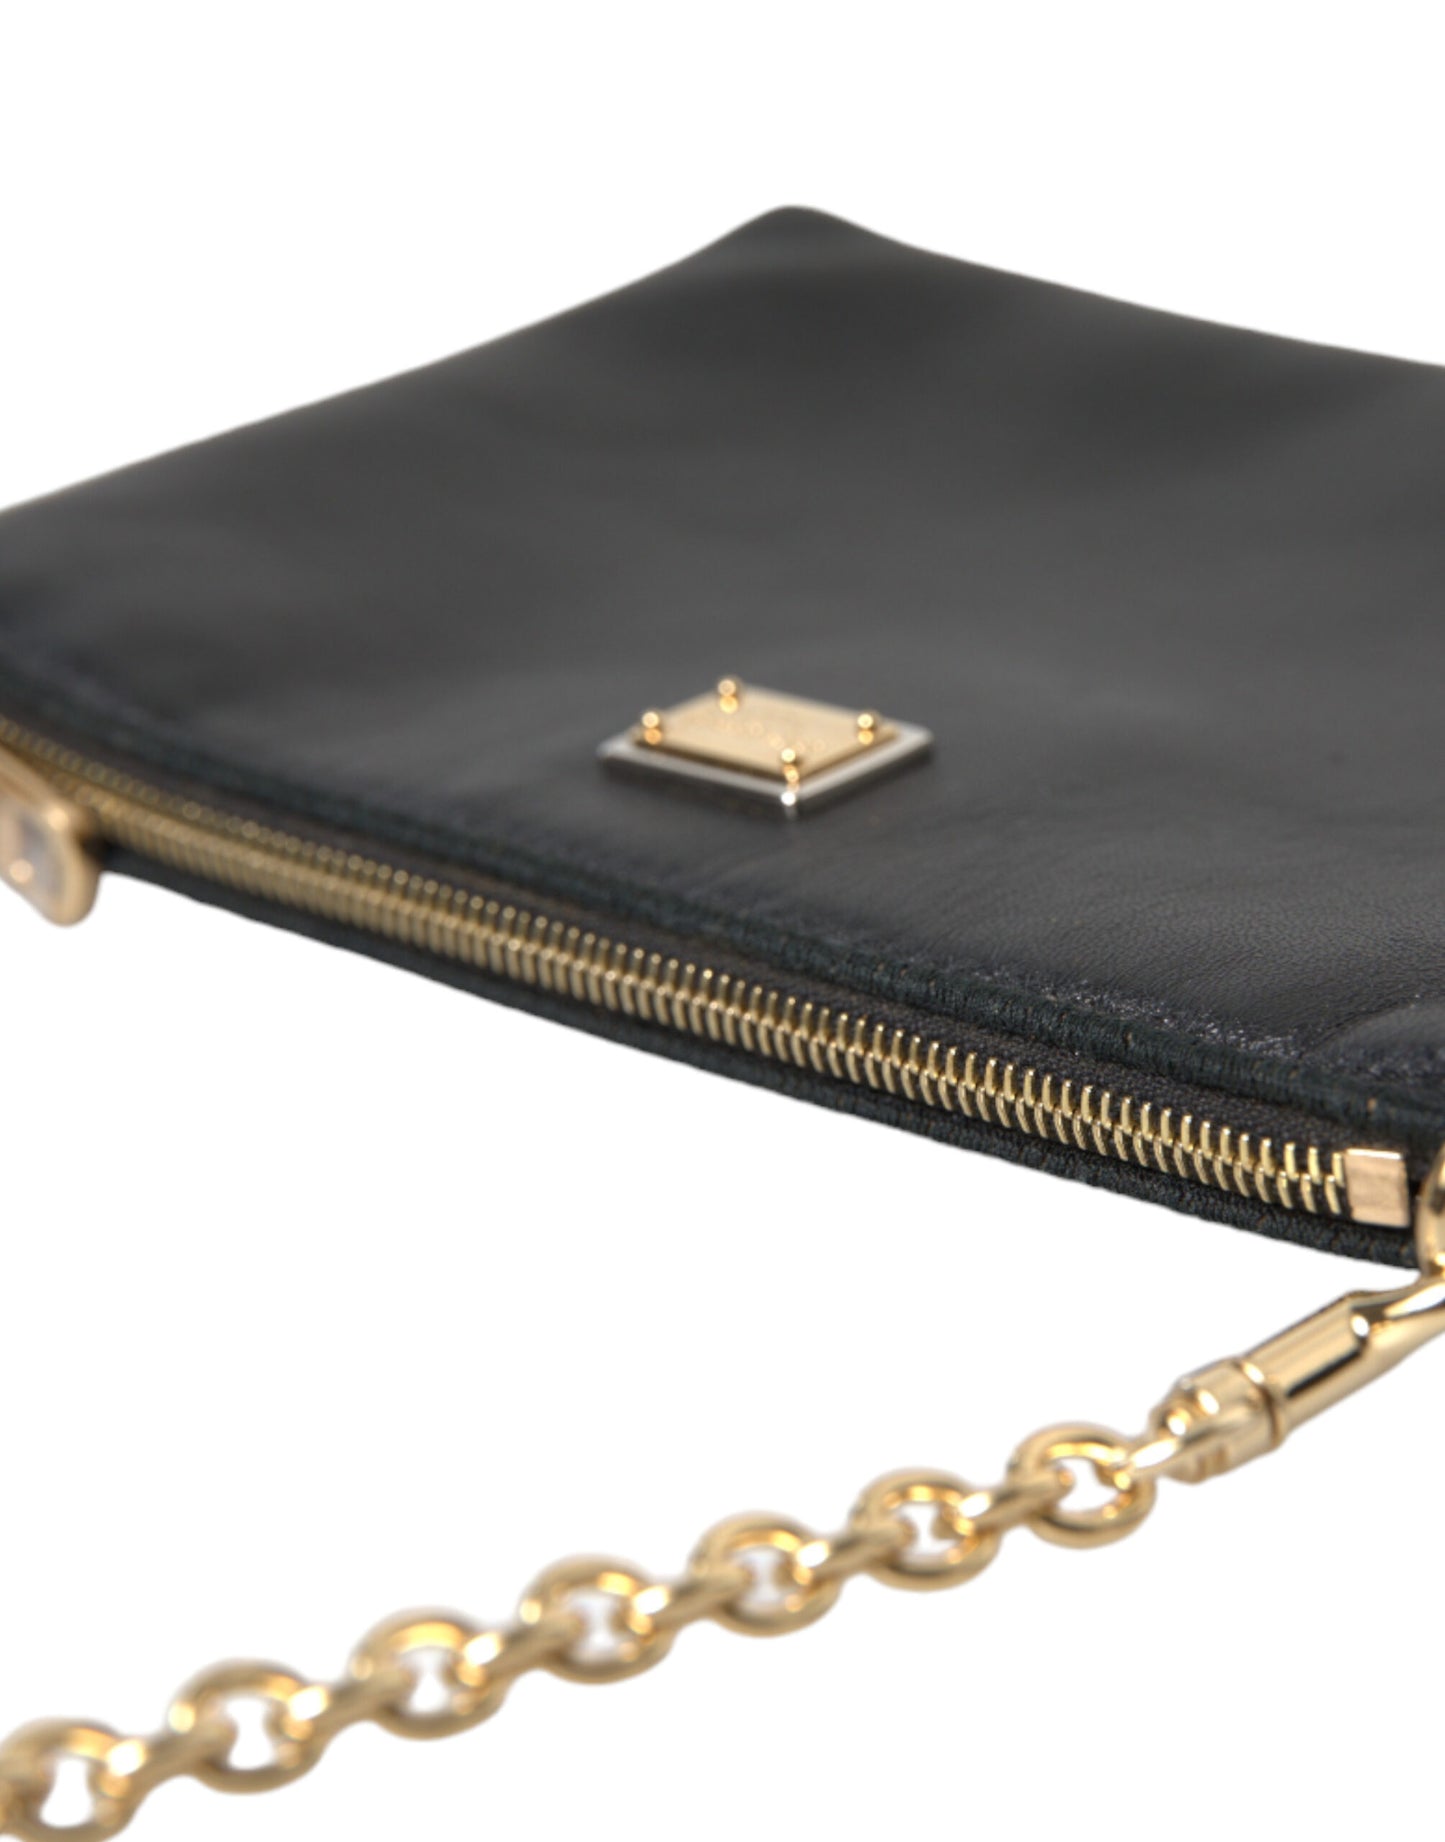 Elegant Embroidered Leather Clutch